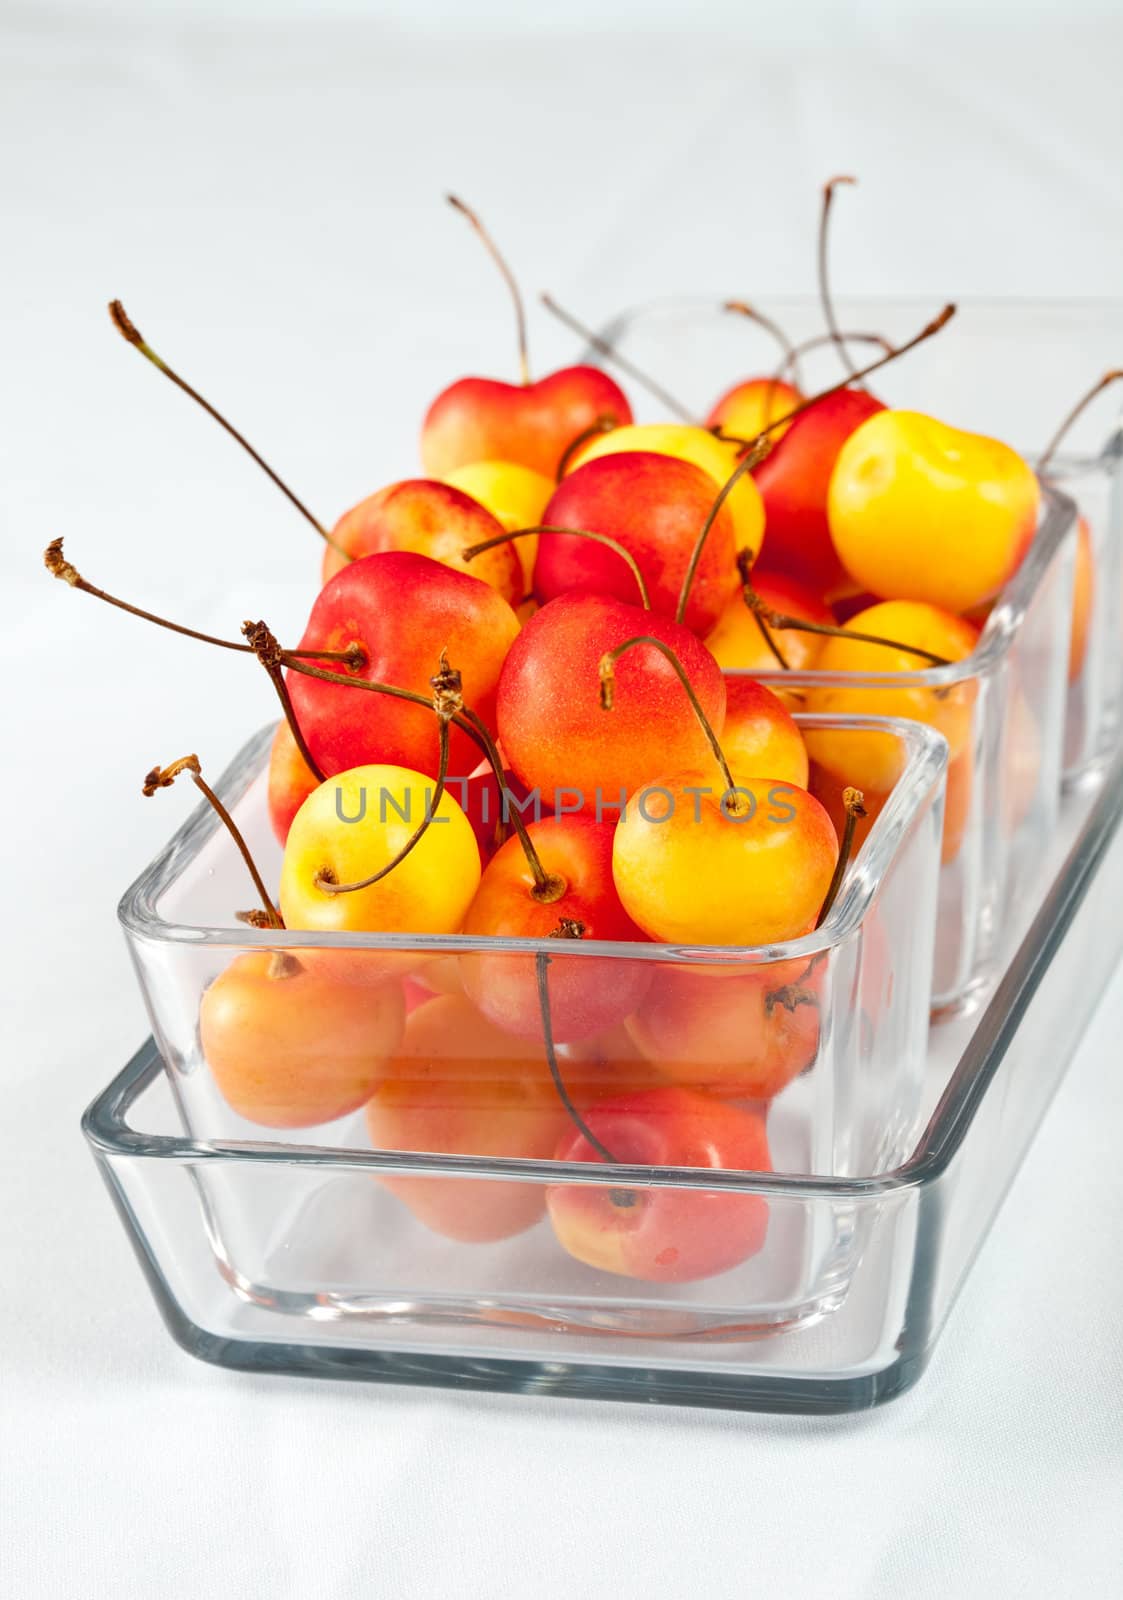 Delicious and colorful fresh rainier cherries in a bowl